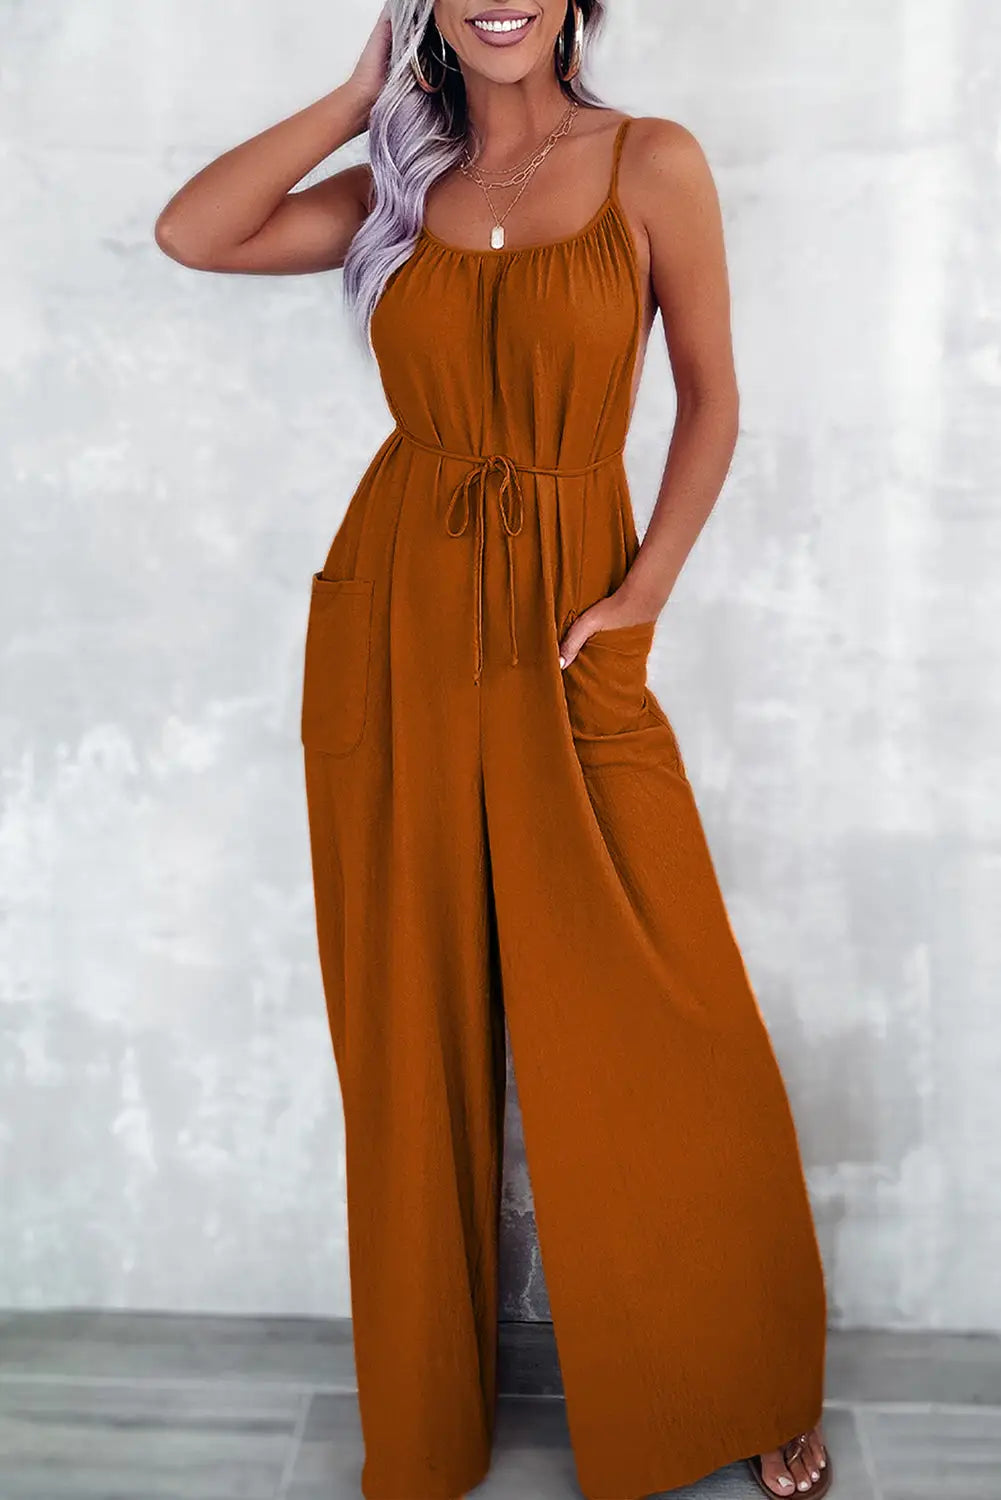 Chestnut spaghetti straps waist tie wide leg jumpsuit with pockets - l / 100% polyester - jumpsuits & rompers